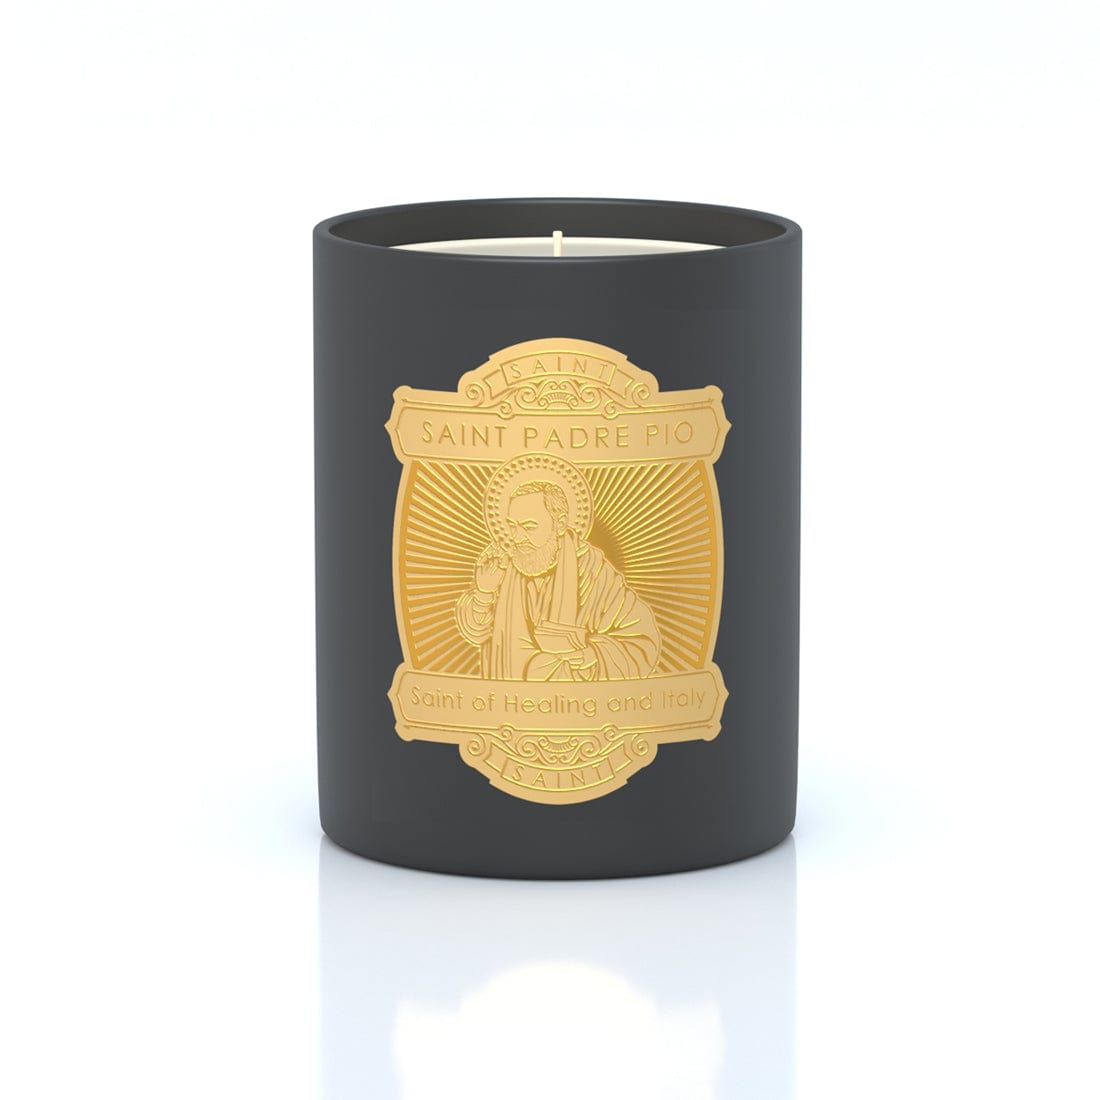 Saint Padre Pio - Special Edition Candle